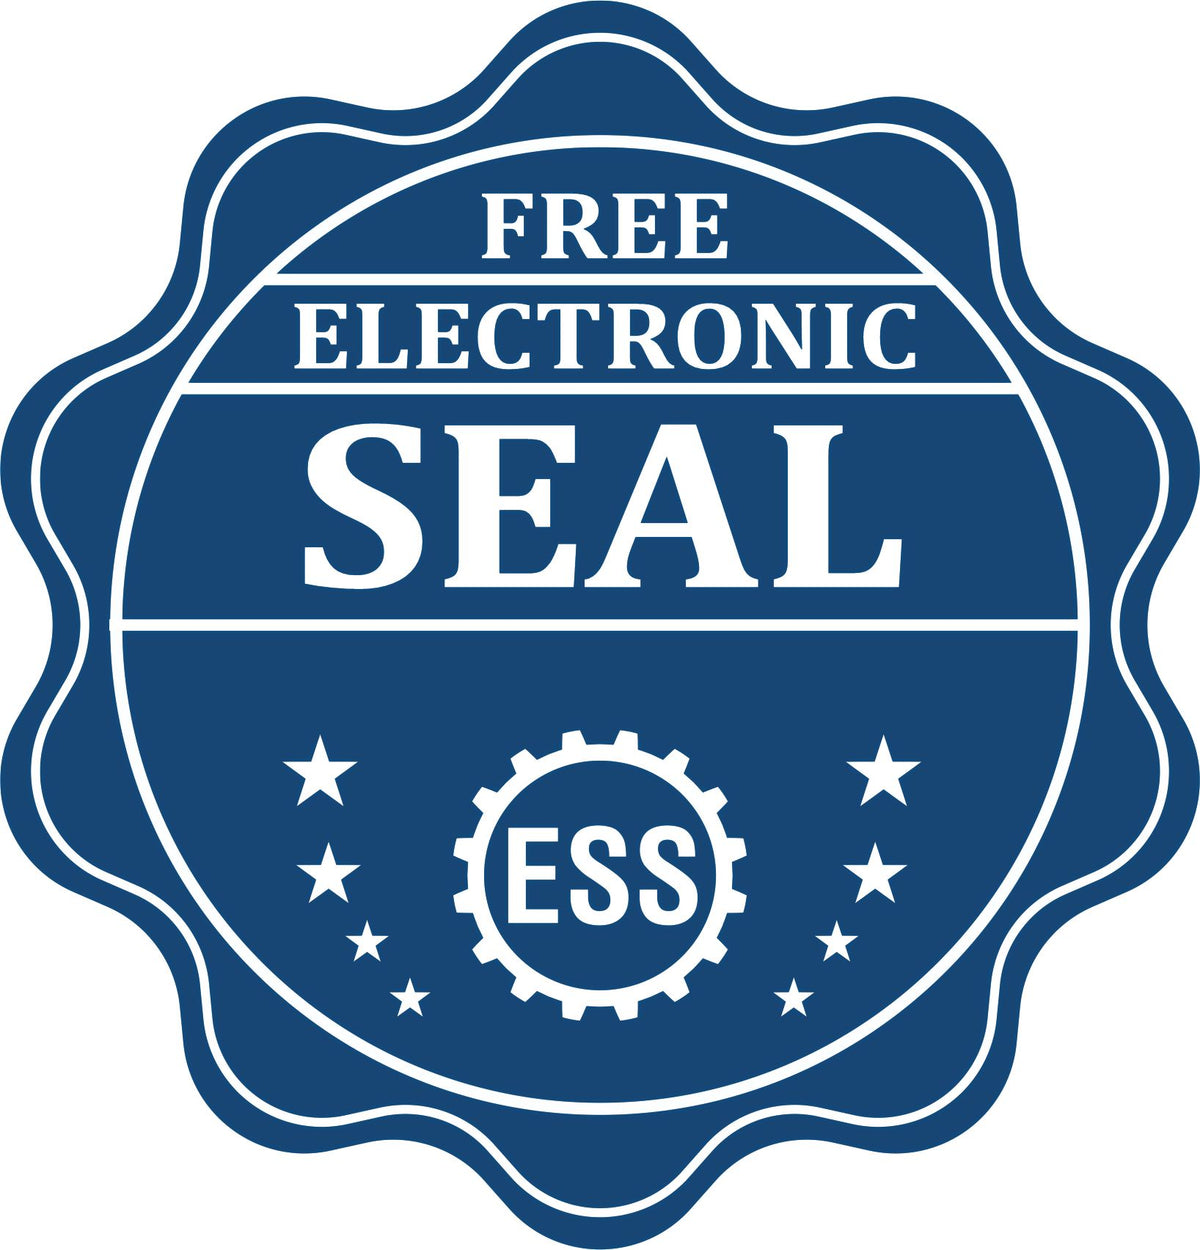 A badge showing a free electronic seal for the Long Reach Massachusetts Land Surveyor Seal with stars and the ESS gear on the emblem.